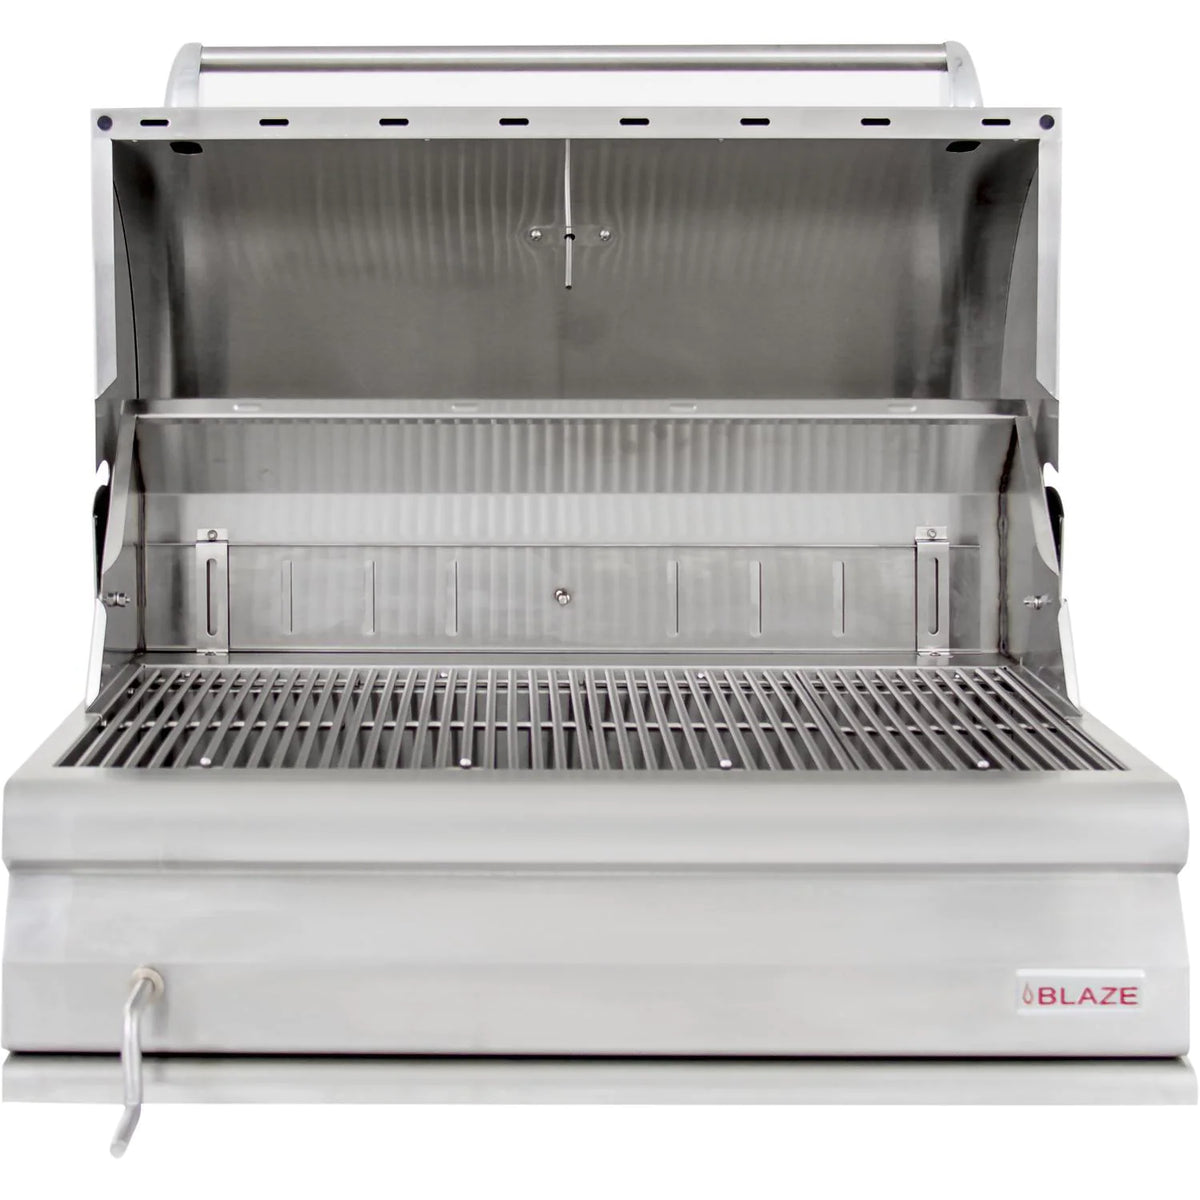 Blaze 4 Cooking Grids 32 Inch Charcoal Grill Hood Open